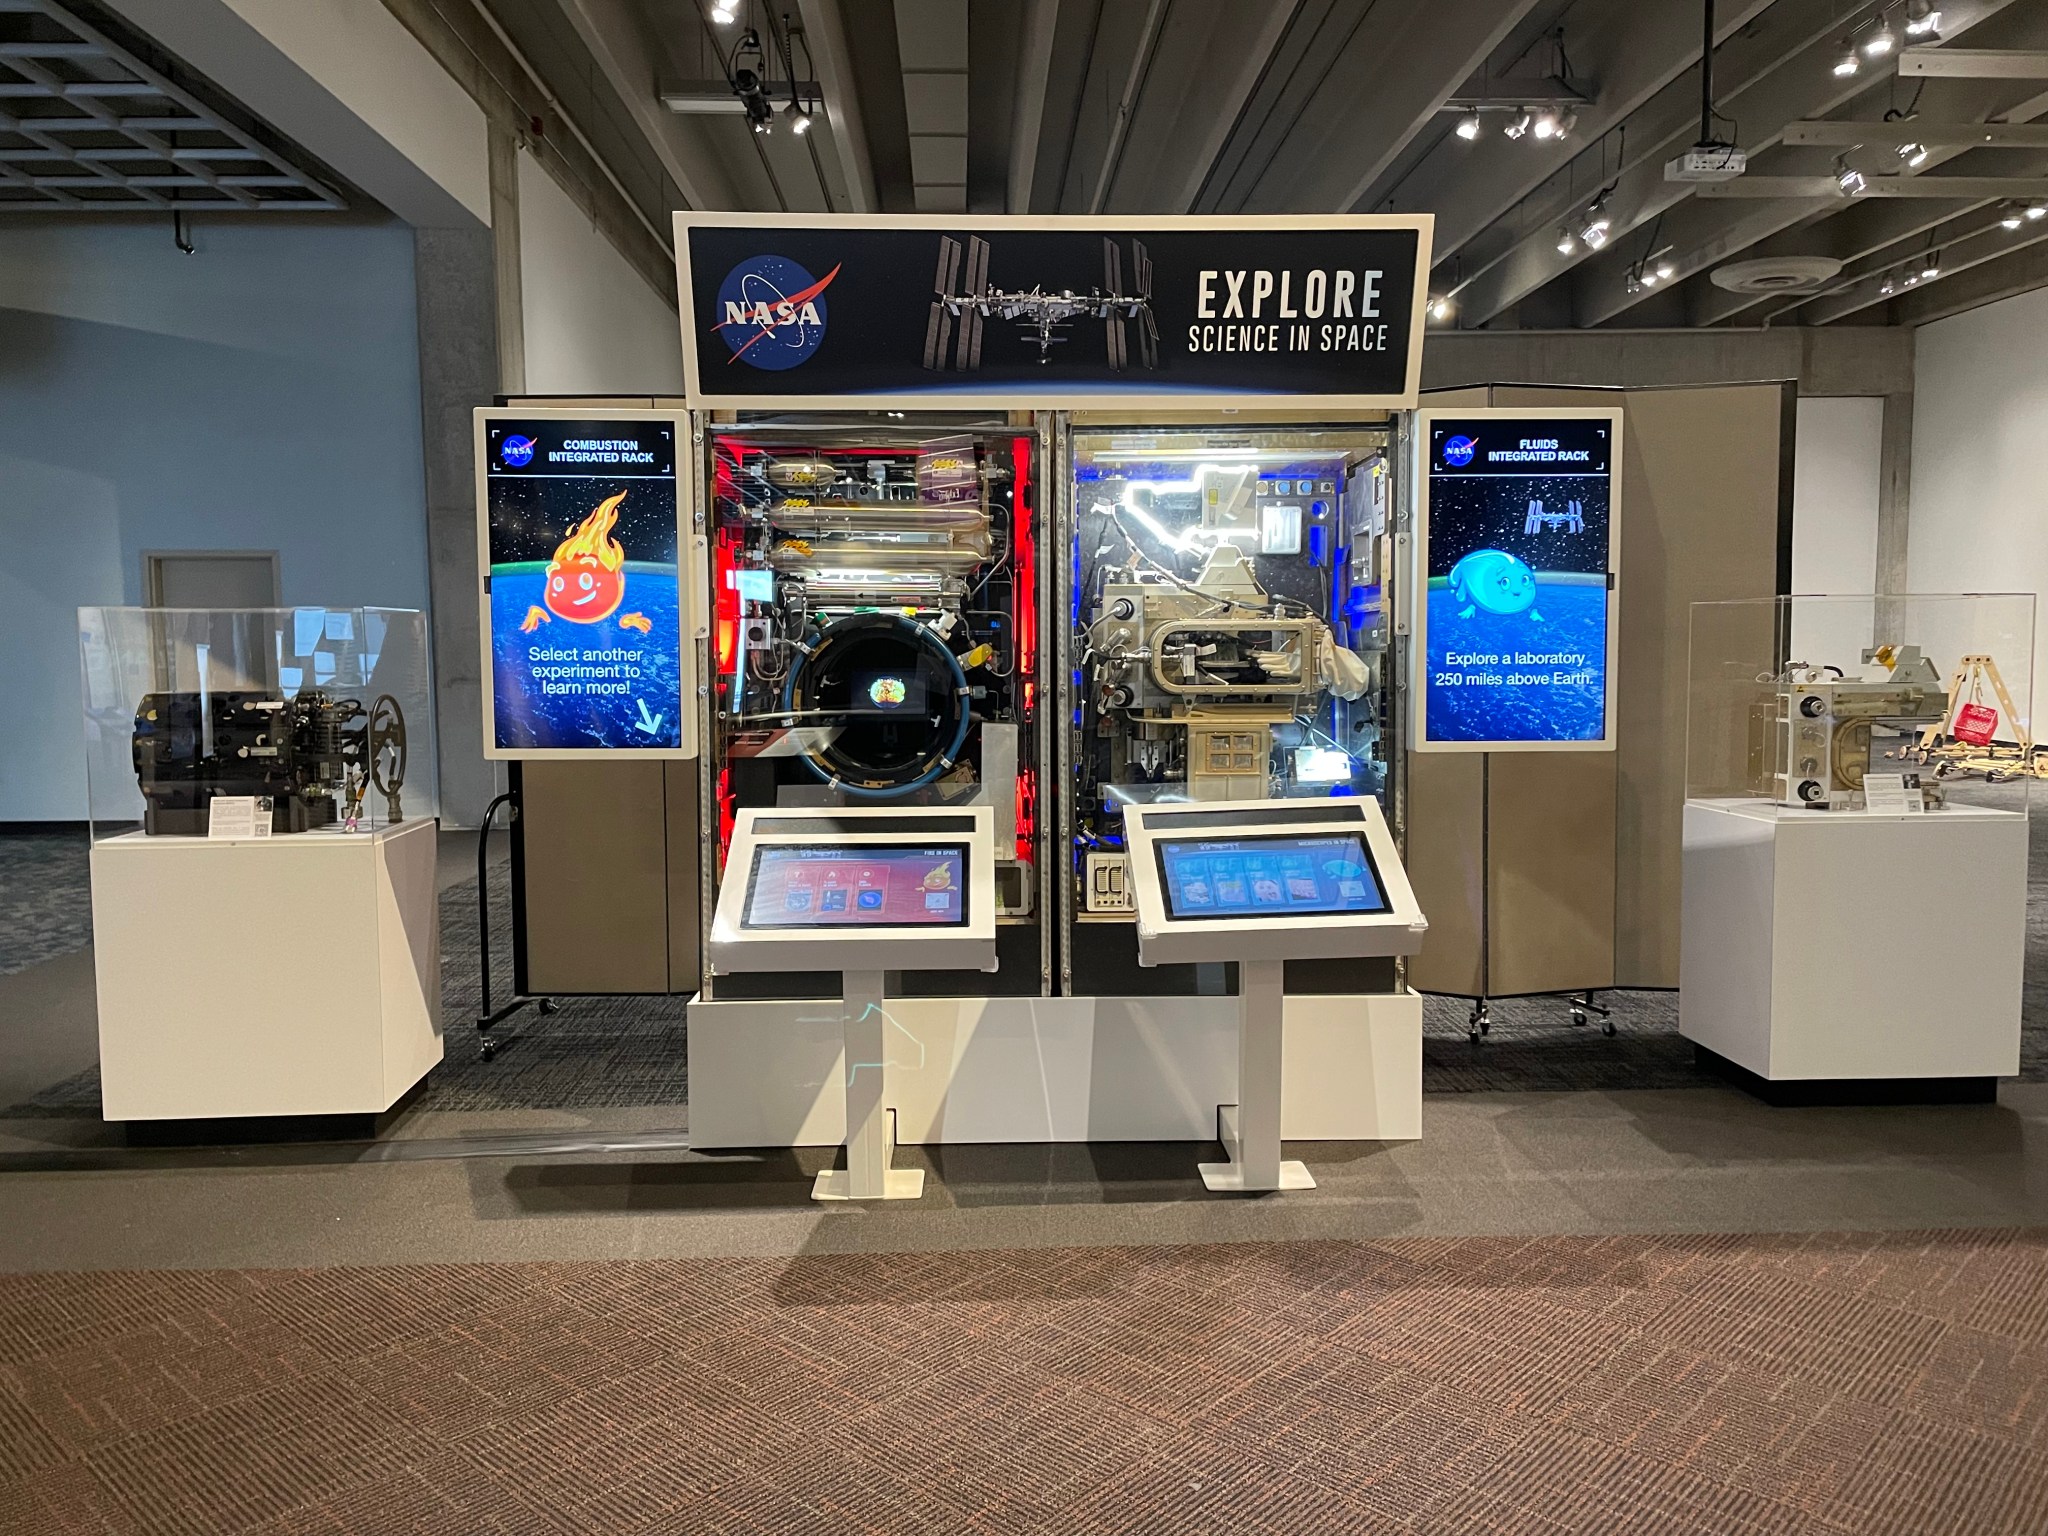 An exhibit with two touchscreen monitors and colorful video screens that feature animations and read “Combustion Integrated Rack” and “Fluids Integrated Rack” on either side. Text on a sign at the top of the exhibit reads, “Explore Science in Space.” A NASA meatball logo and an image of the International Space Station are also on the sign. Real space station hardware can be seen between the video monitors and on either side of the exhibit.